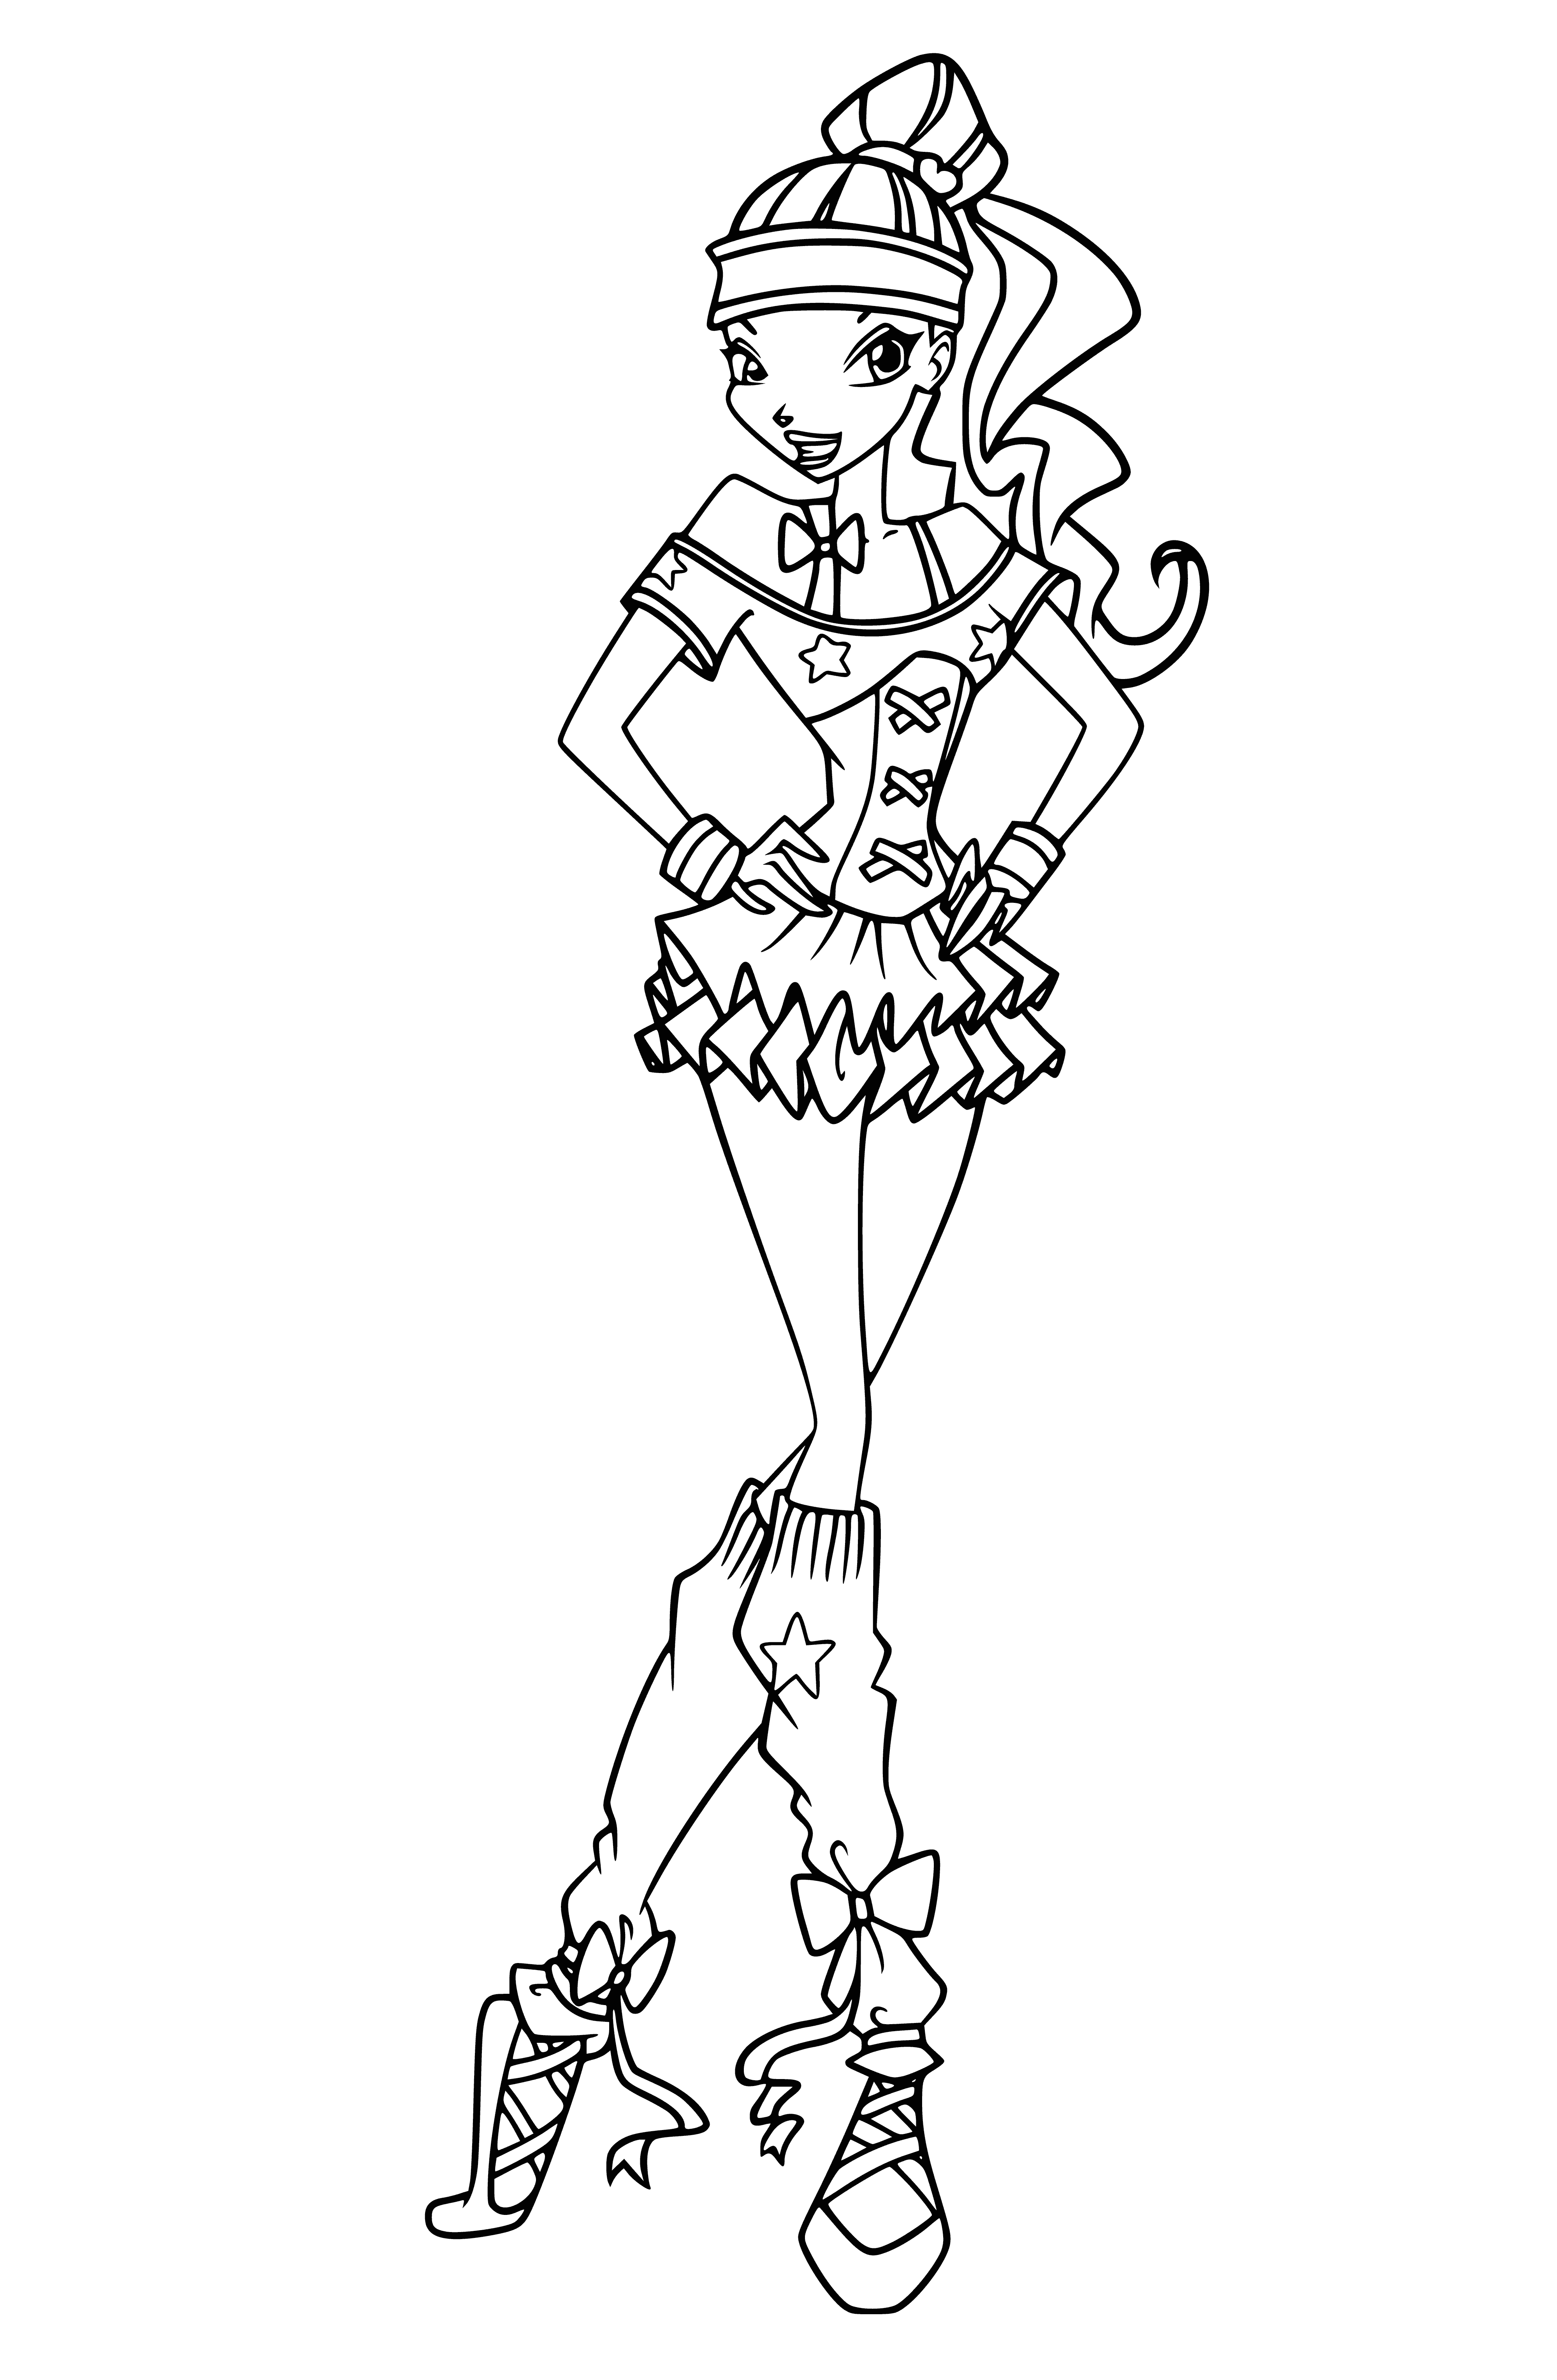 coloring page: Girl in dance costume w/ full skirt, green ribbon & serious expression.